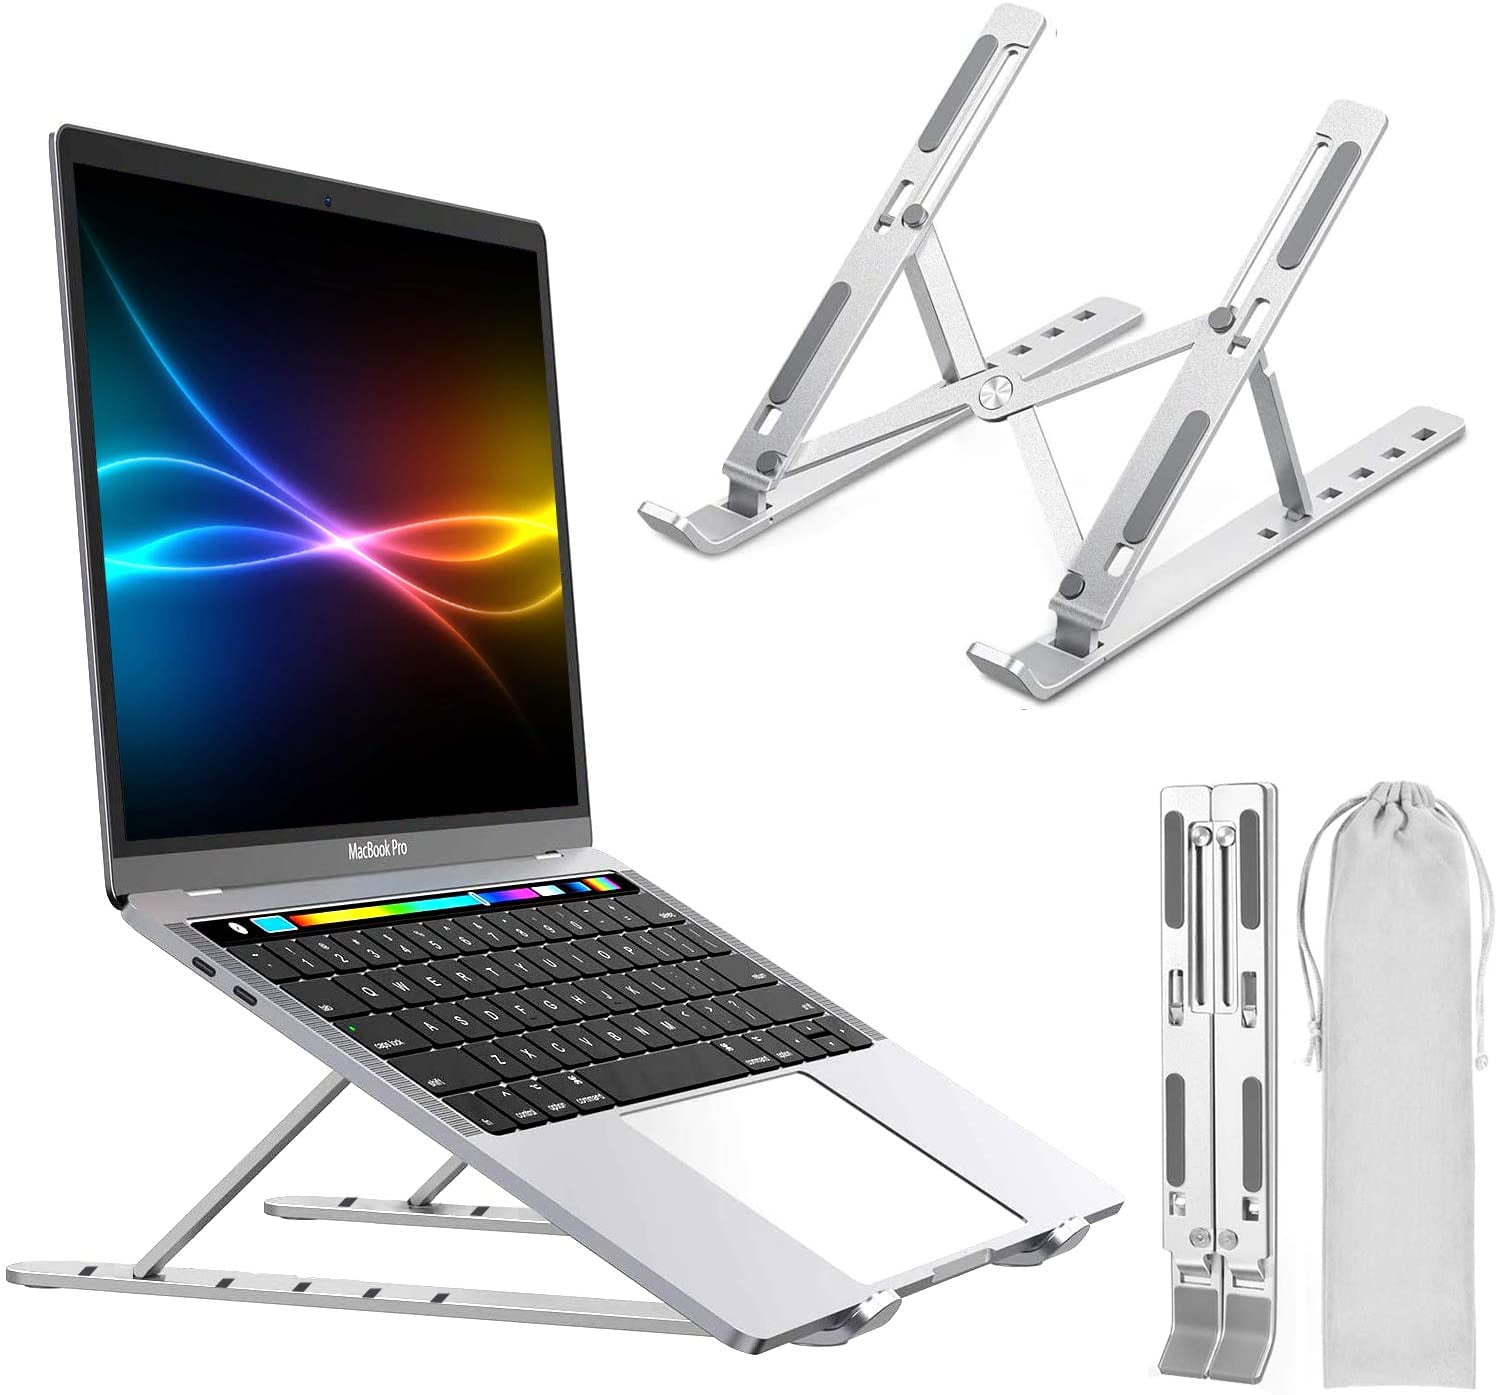 Portable Folding Increased Radiator Notebook Holder Stand Compatible with More 10-15.6”Laptops Color : Silver Aluminum Alloy Laptop Stand Computer Stand